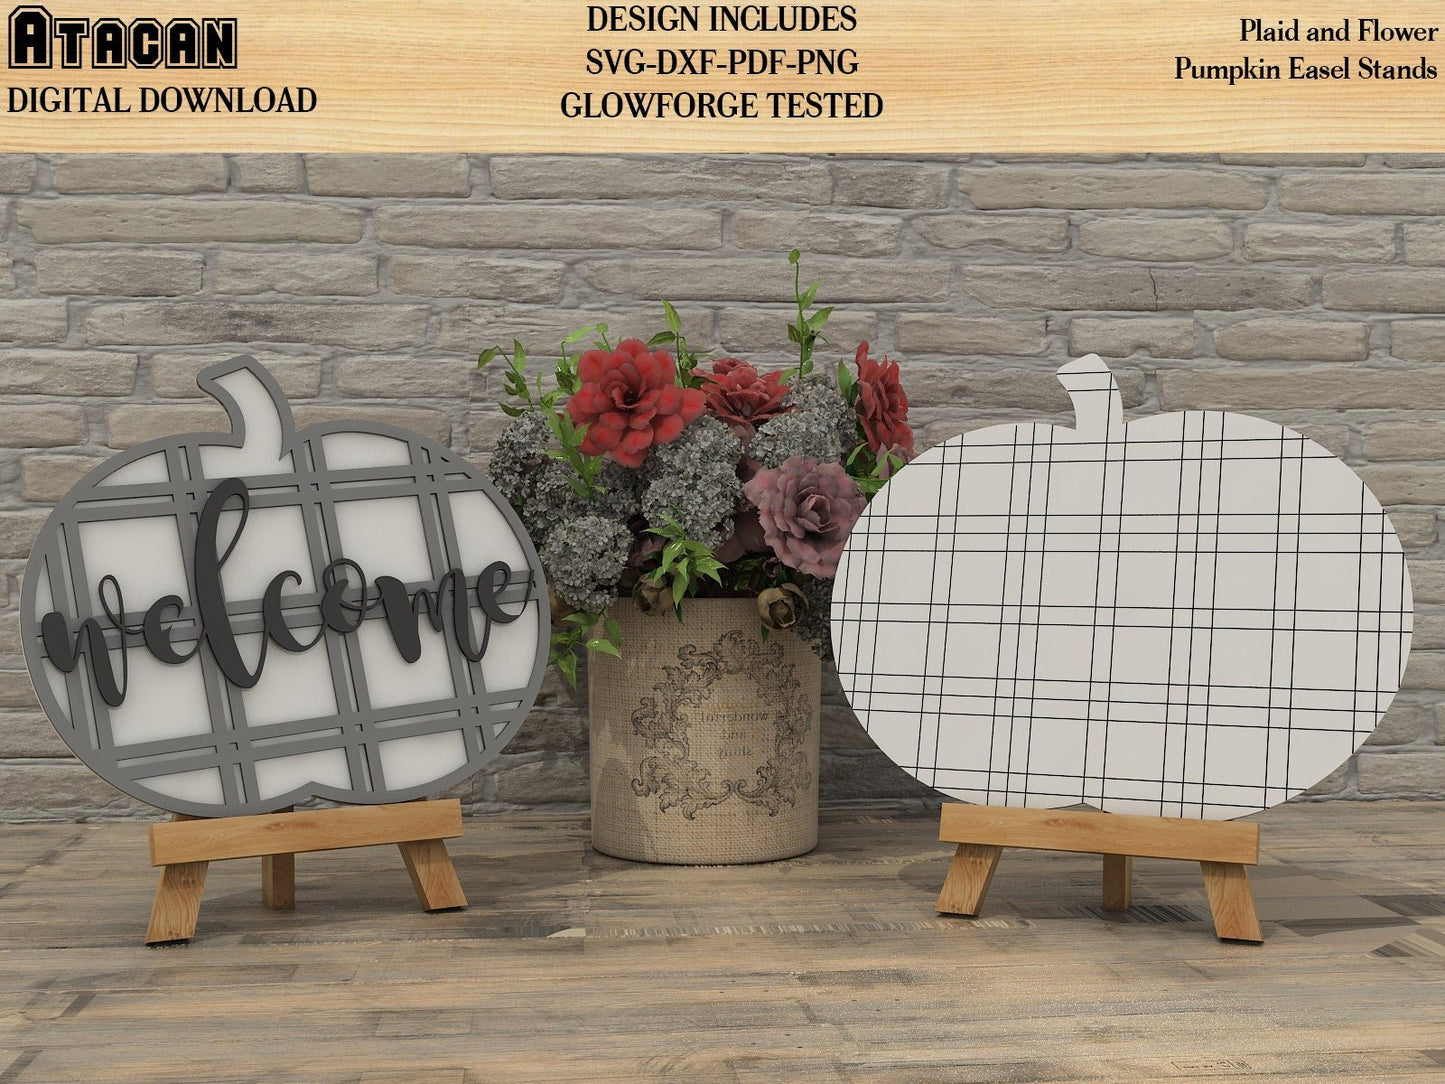 Plaid and Flowery Pumpkin for Easel Stands SVG files for Glowforge 174